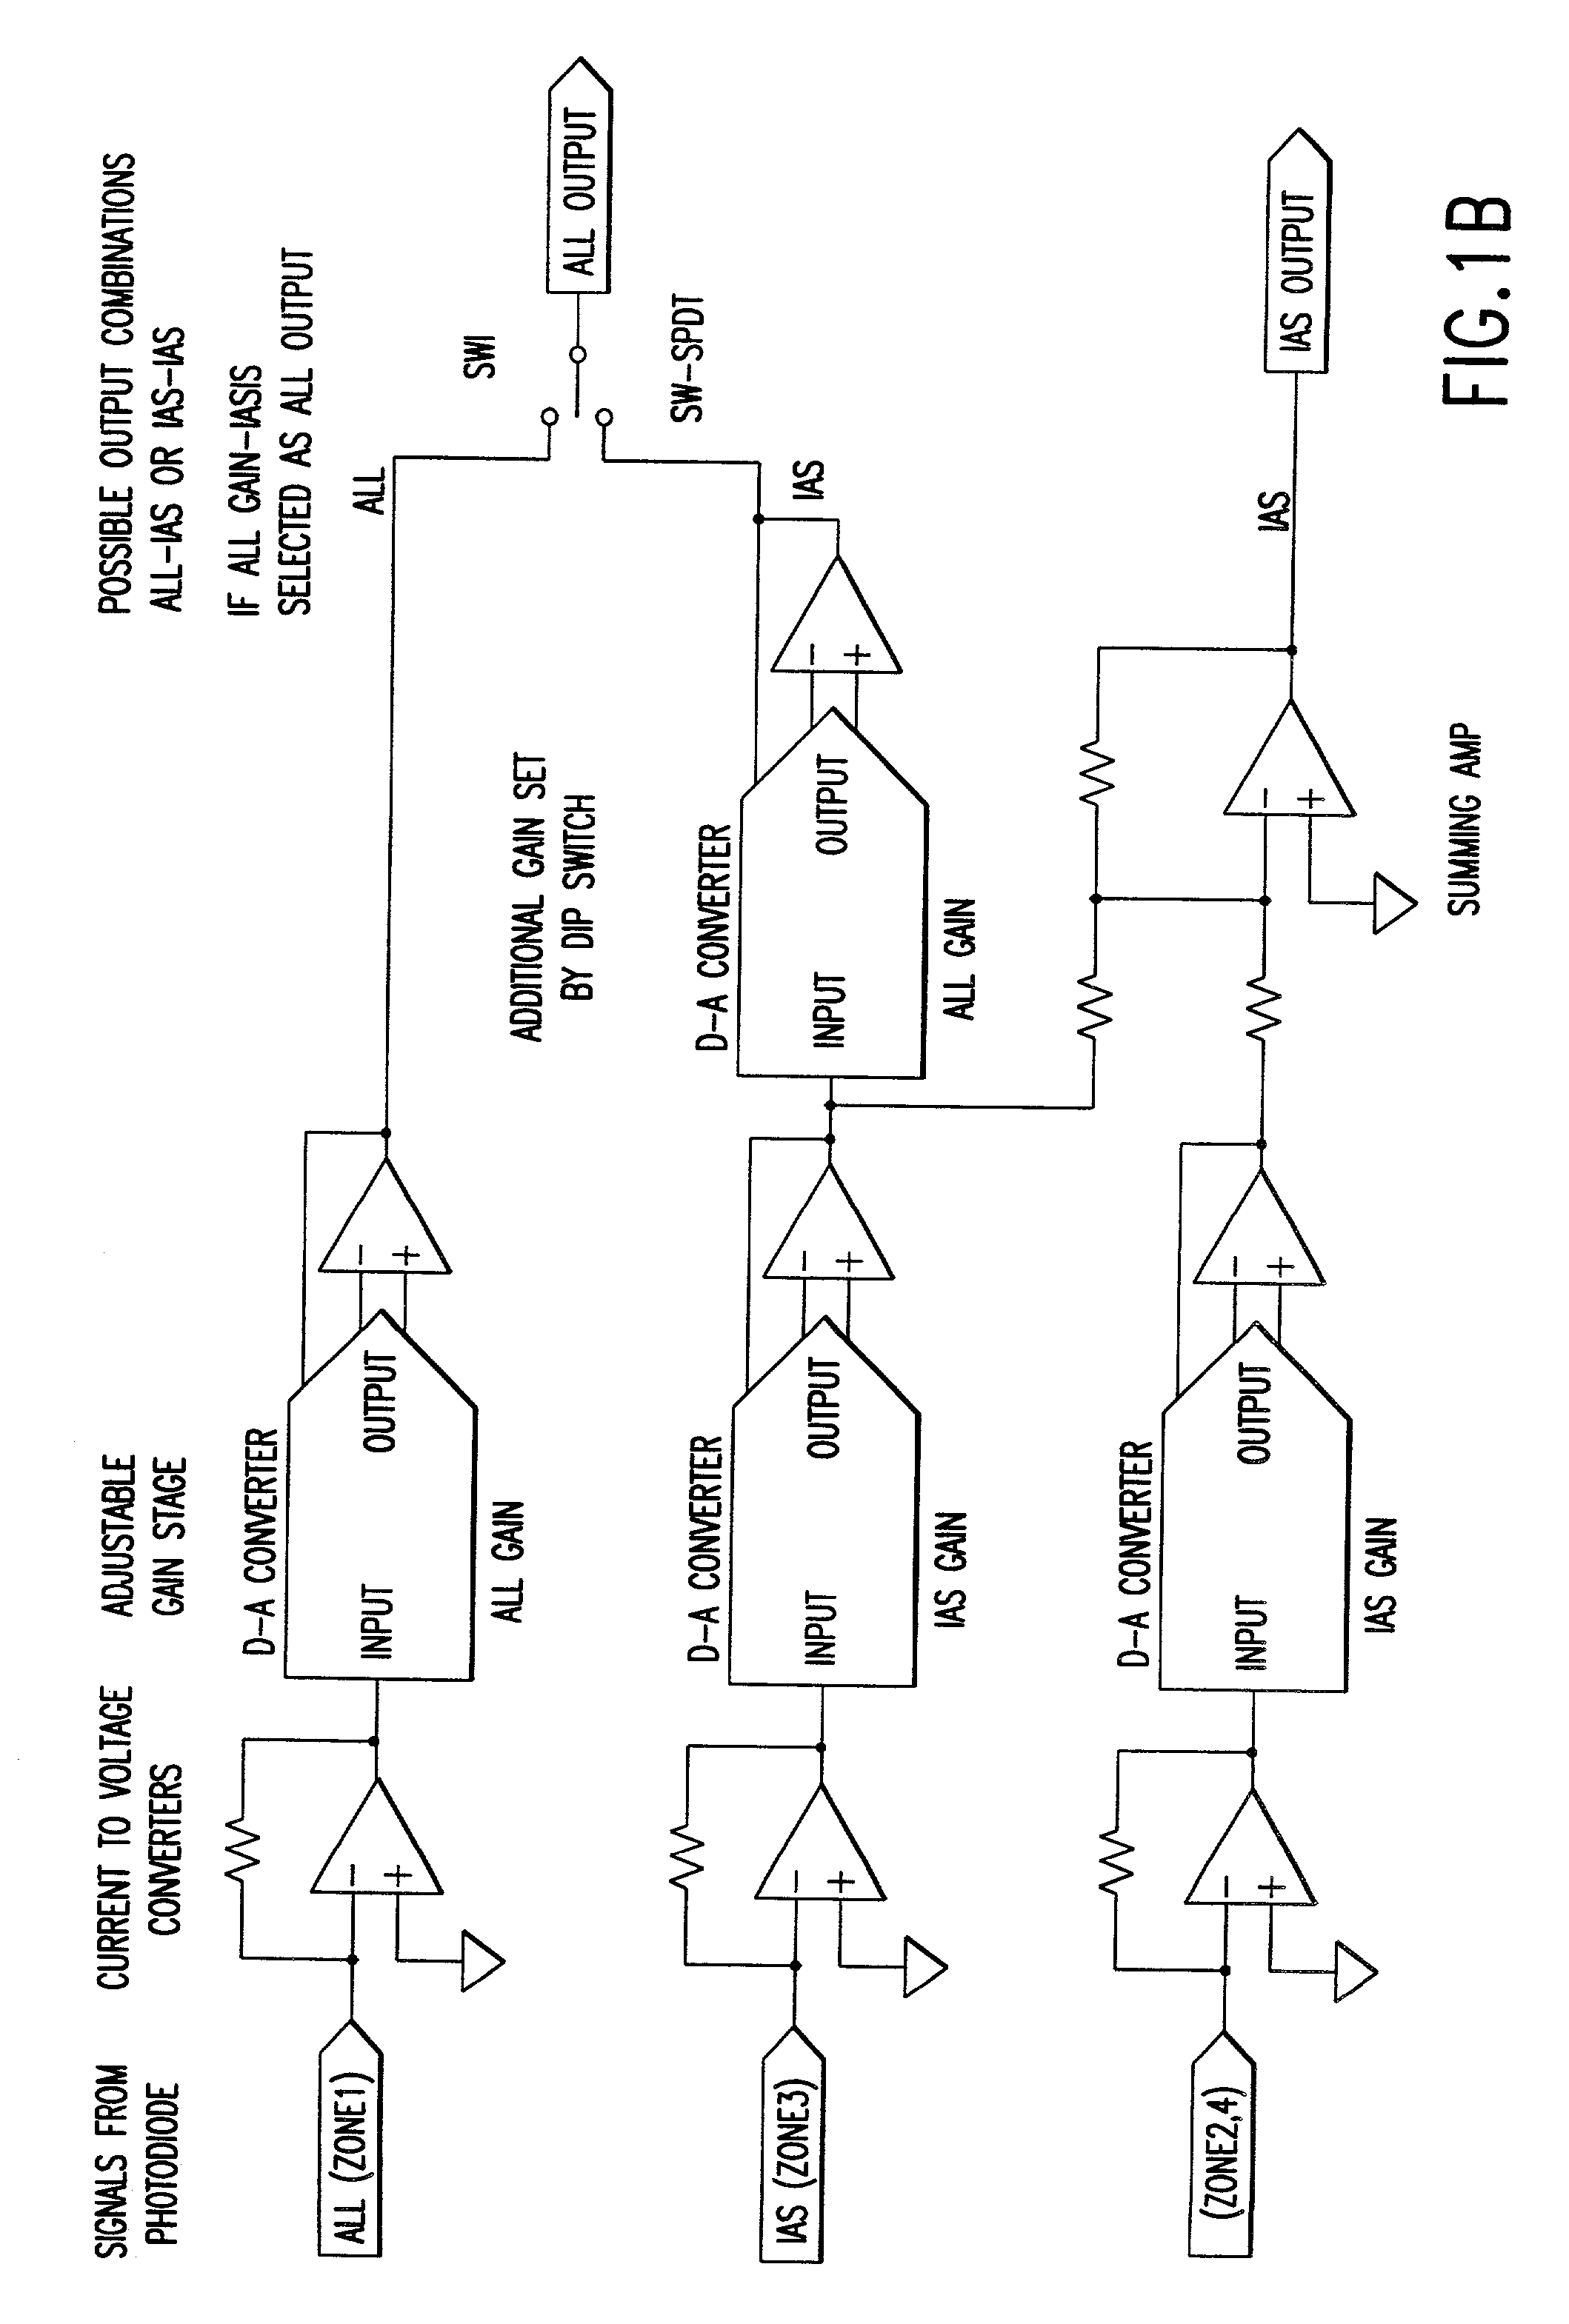 Optical method and apparatus for red blood cell differentiation on a cell-by-cell basis, and simultaneous analysis of white blood cell differentiation